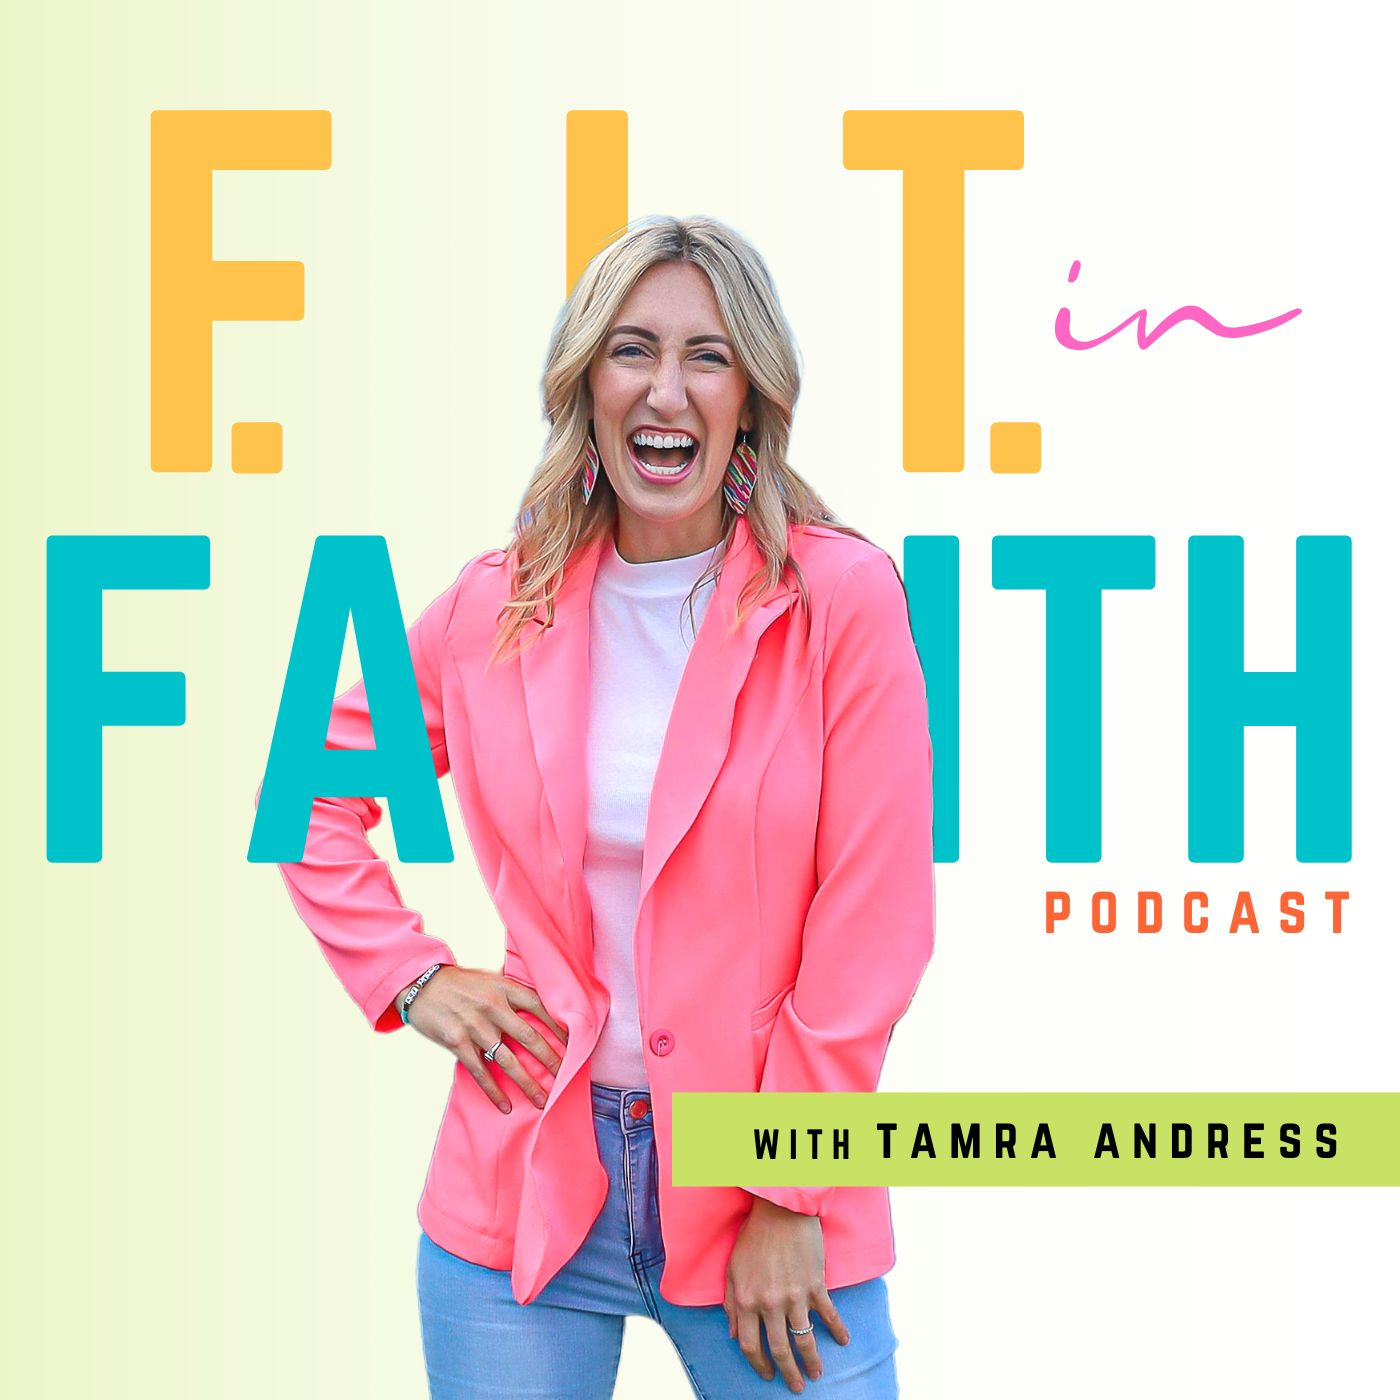 Ep 413: Creating Connection and Community at Events | Tamra Andress & Phil Mershon